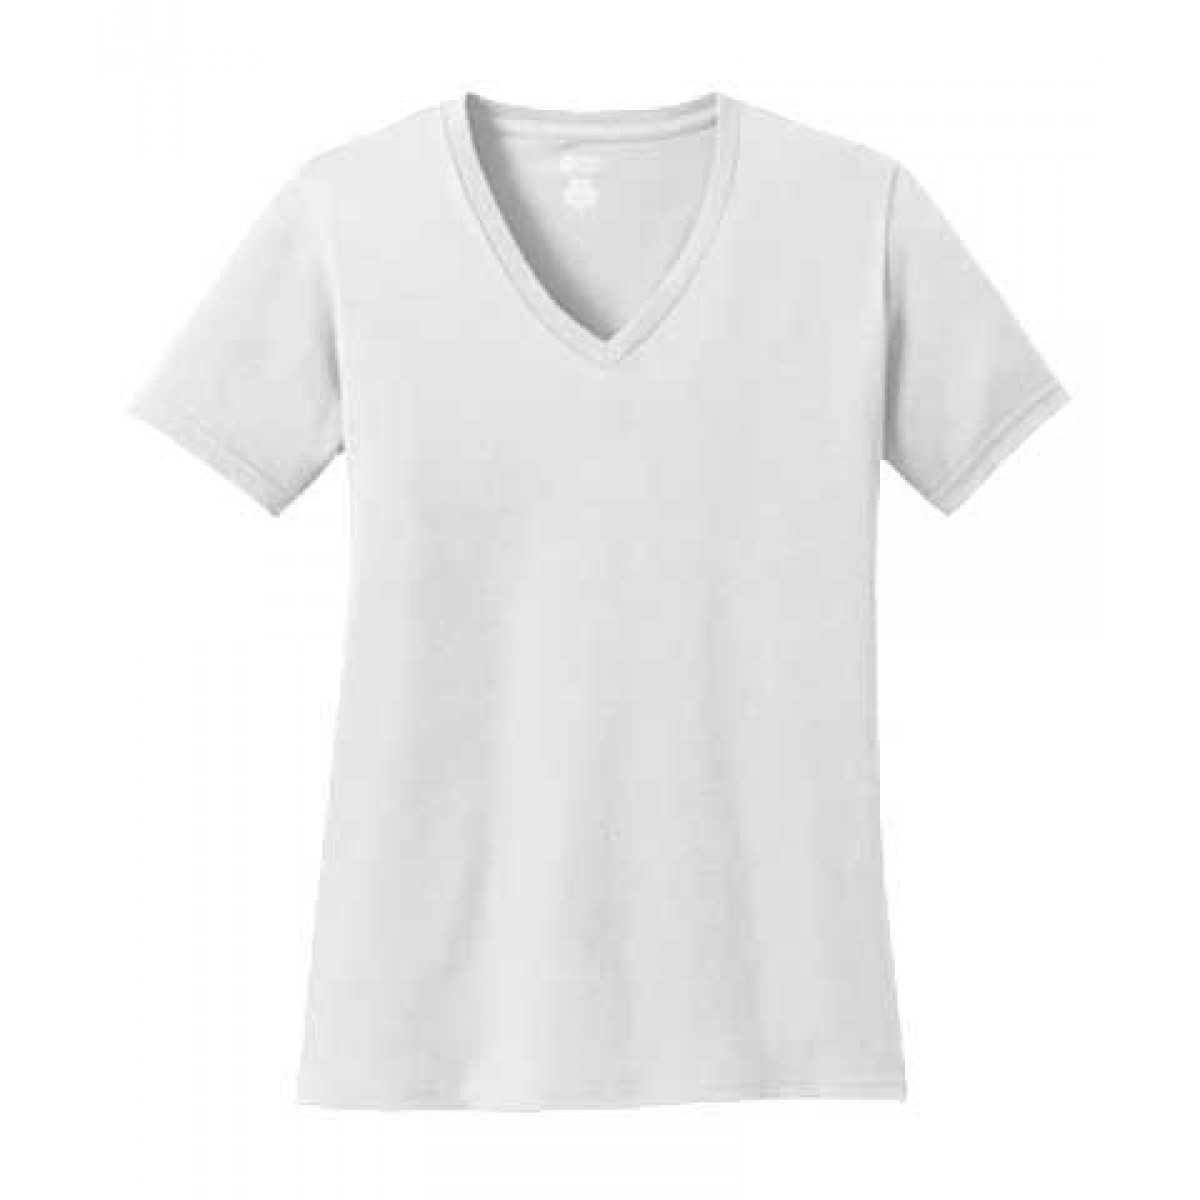 Ladies V-Neck Tee - Click for More Colors-White-XL